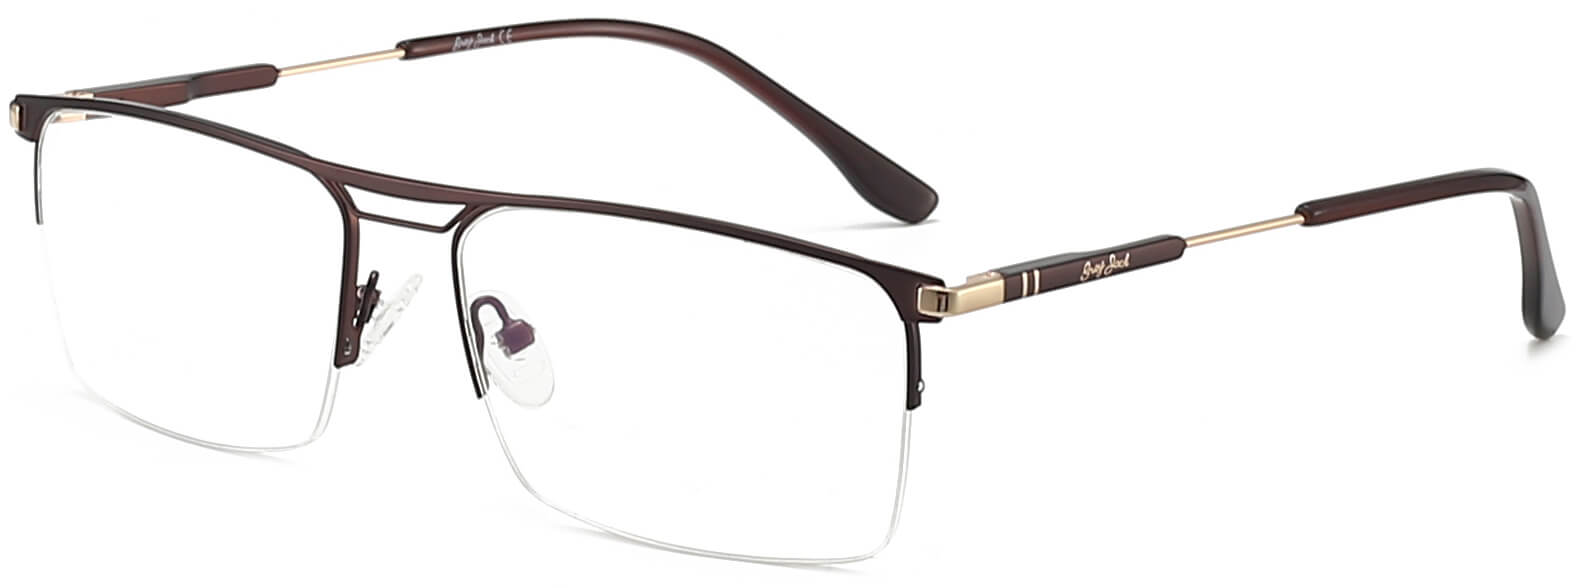 Mitchell Rectangle Brown Eyeglasses from ANRRI, angle view